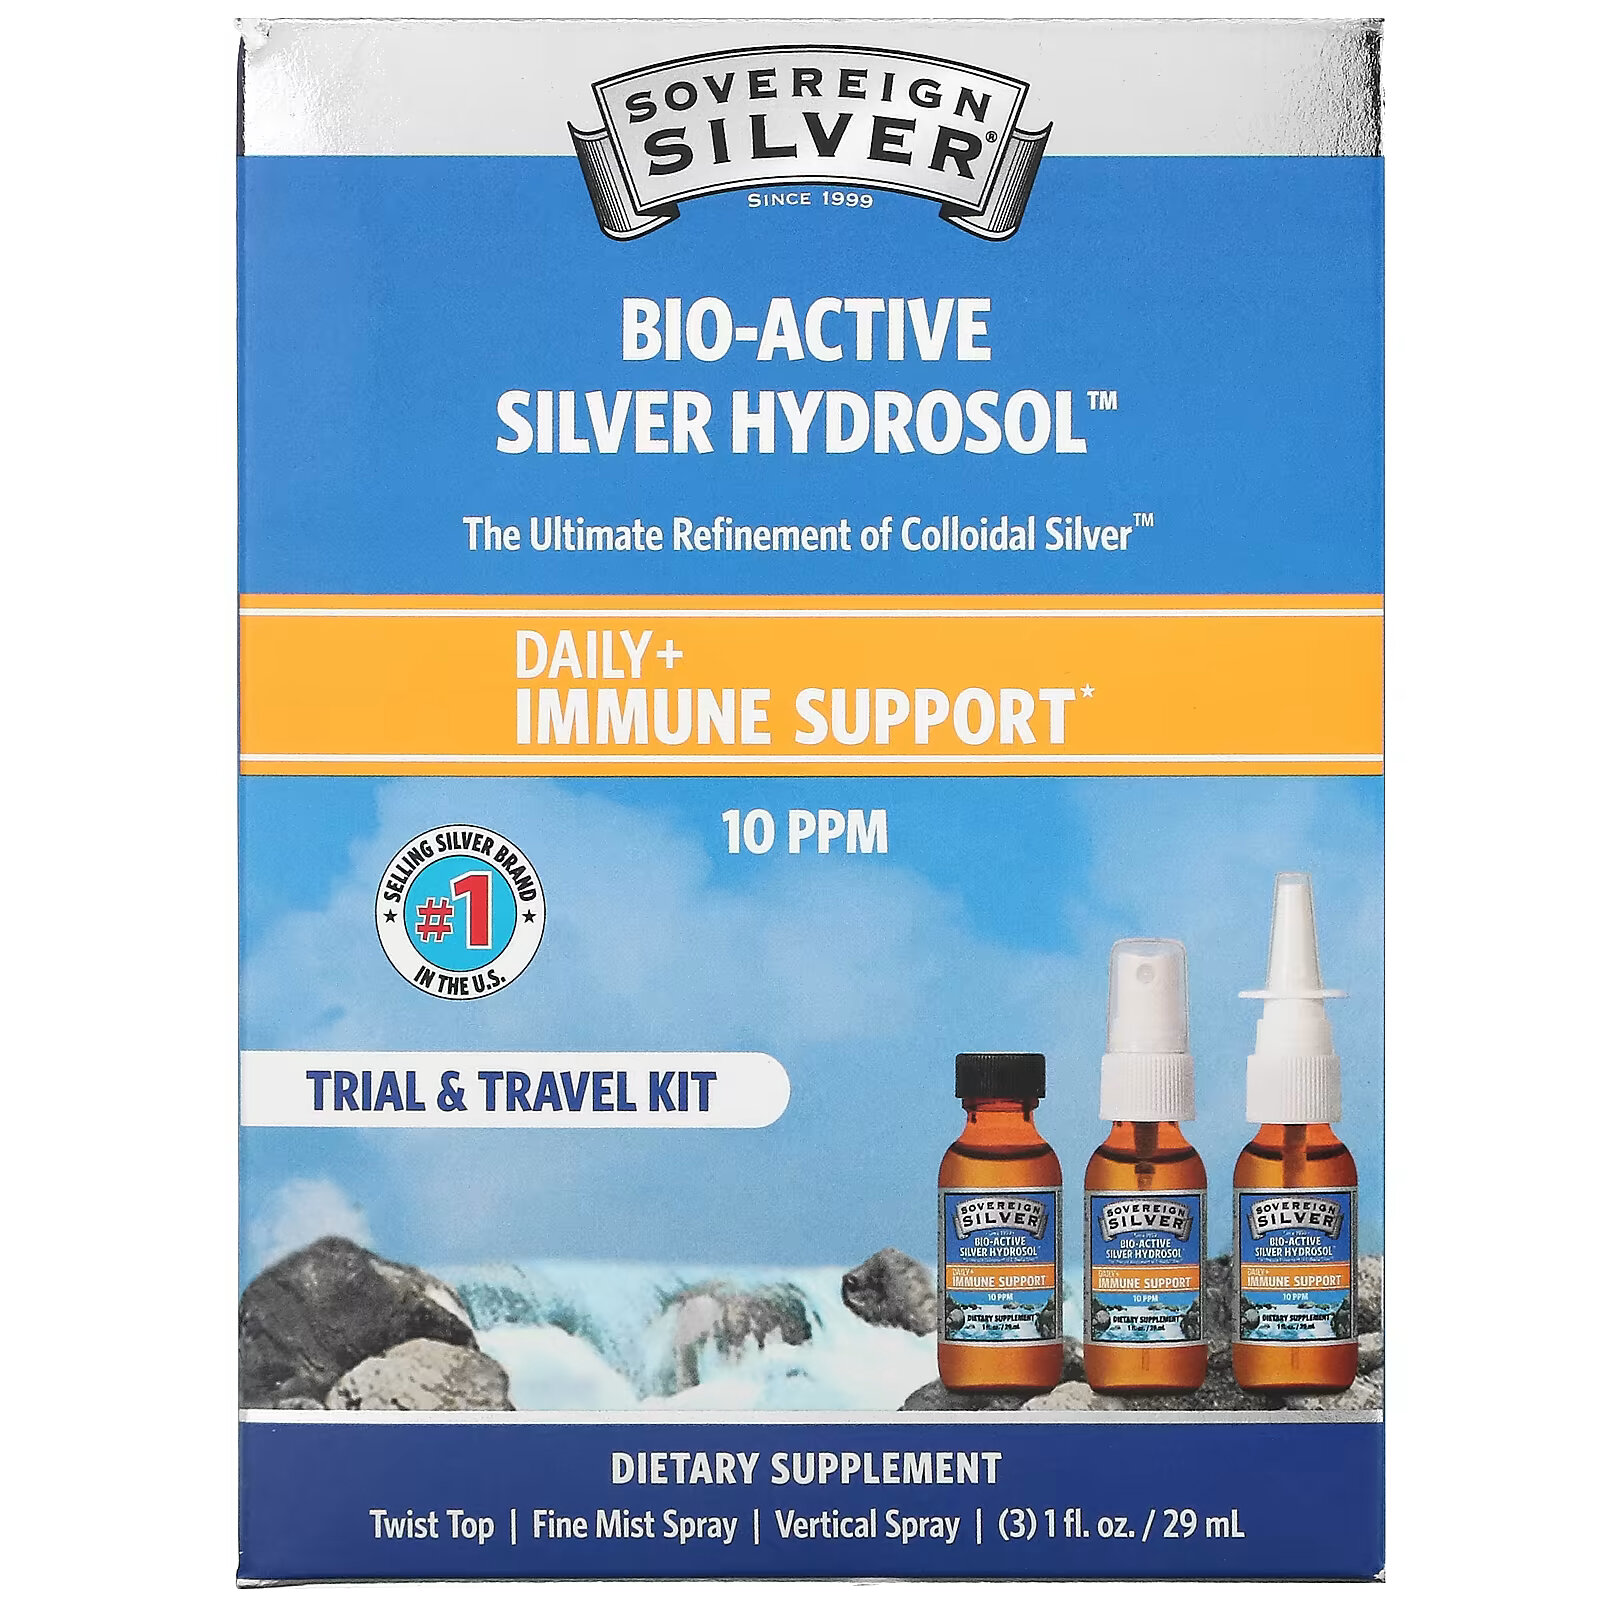 Sovereign Silver, Bio-Active Silver Hydrosol, Daily + Immune Support, Trial & Travel Kit, 10 част. / Млн, 3 шт., По 29 мл (1 жидк. Унция) sovereign silver bio active silver hydrosol daily immune support trial